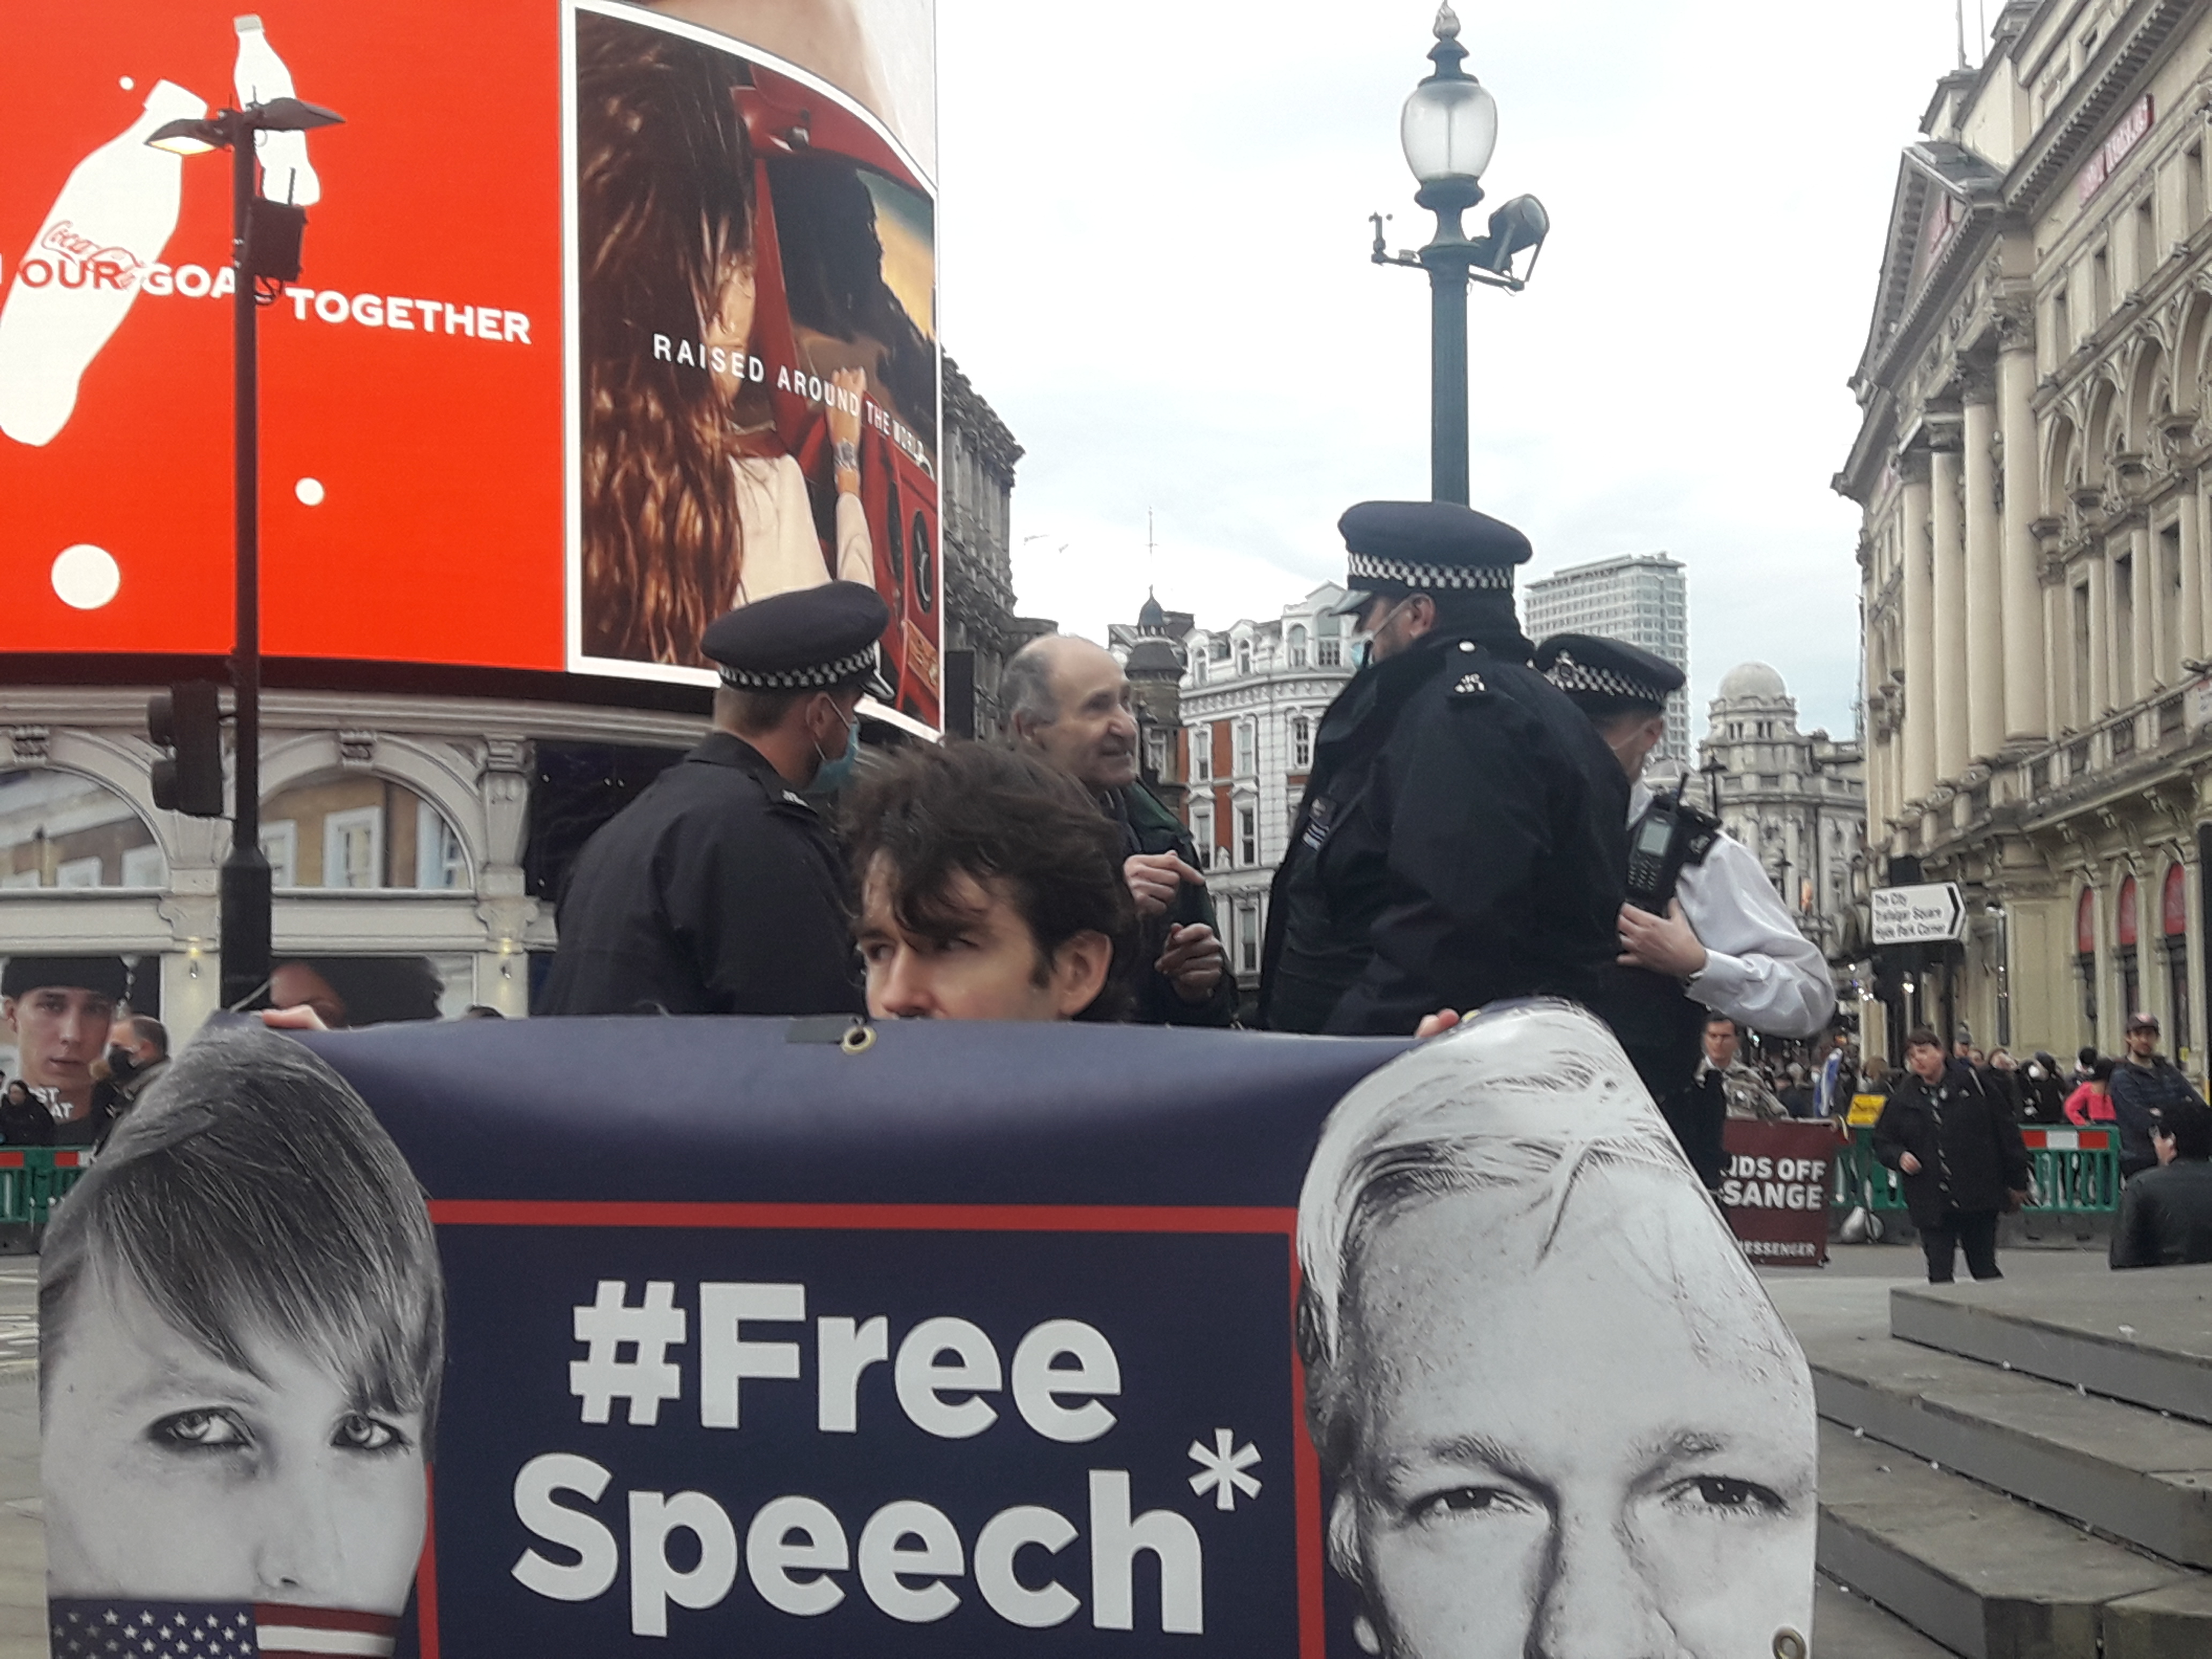 protest_photos:peter-and-pigs-piccadilly-circus-london-3oct20.jpg